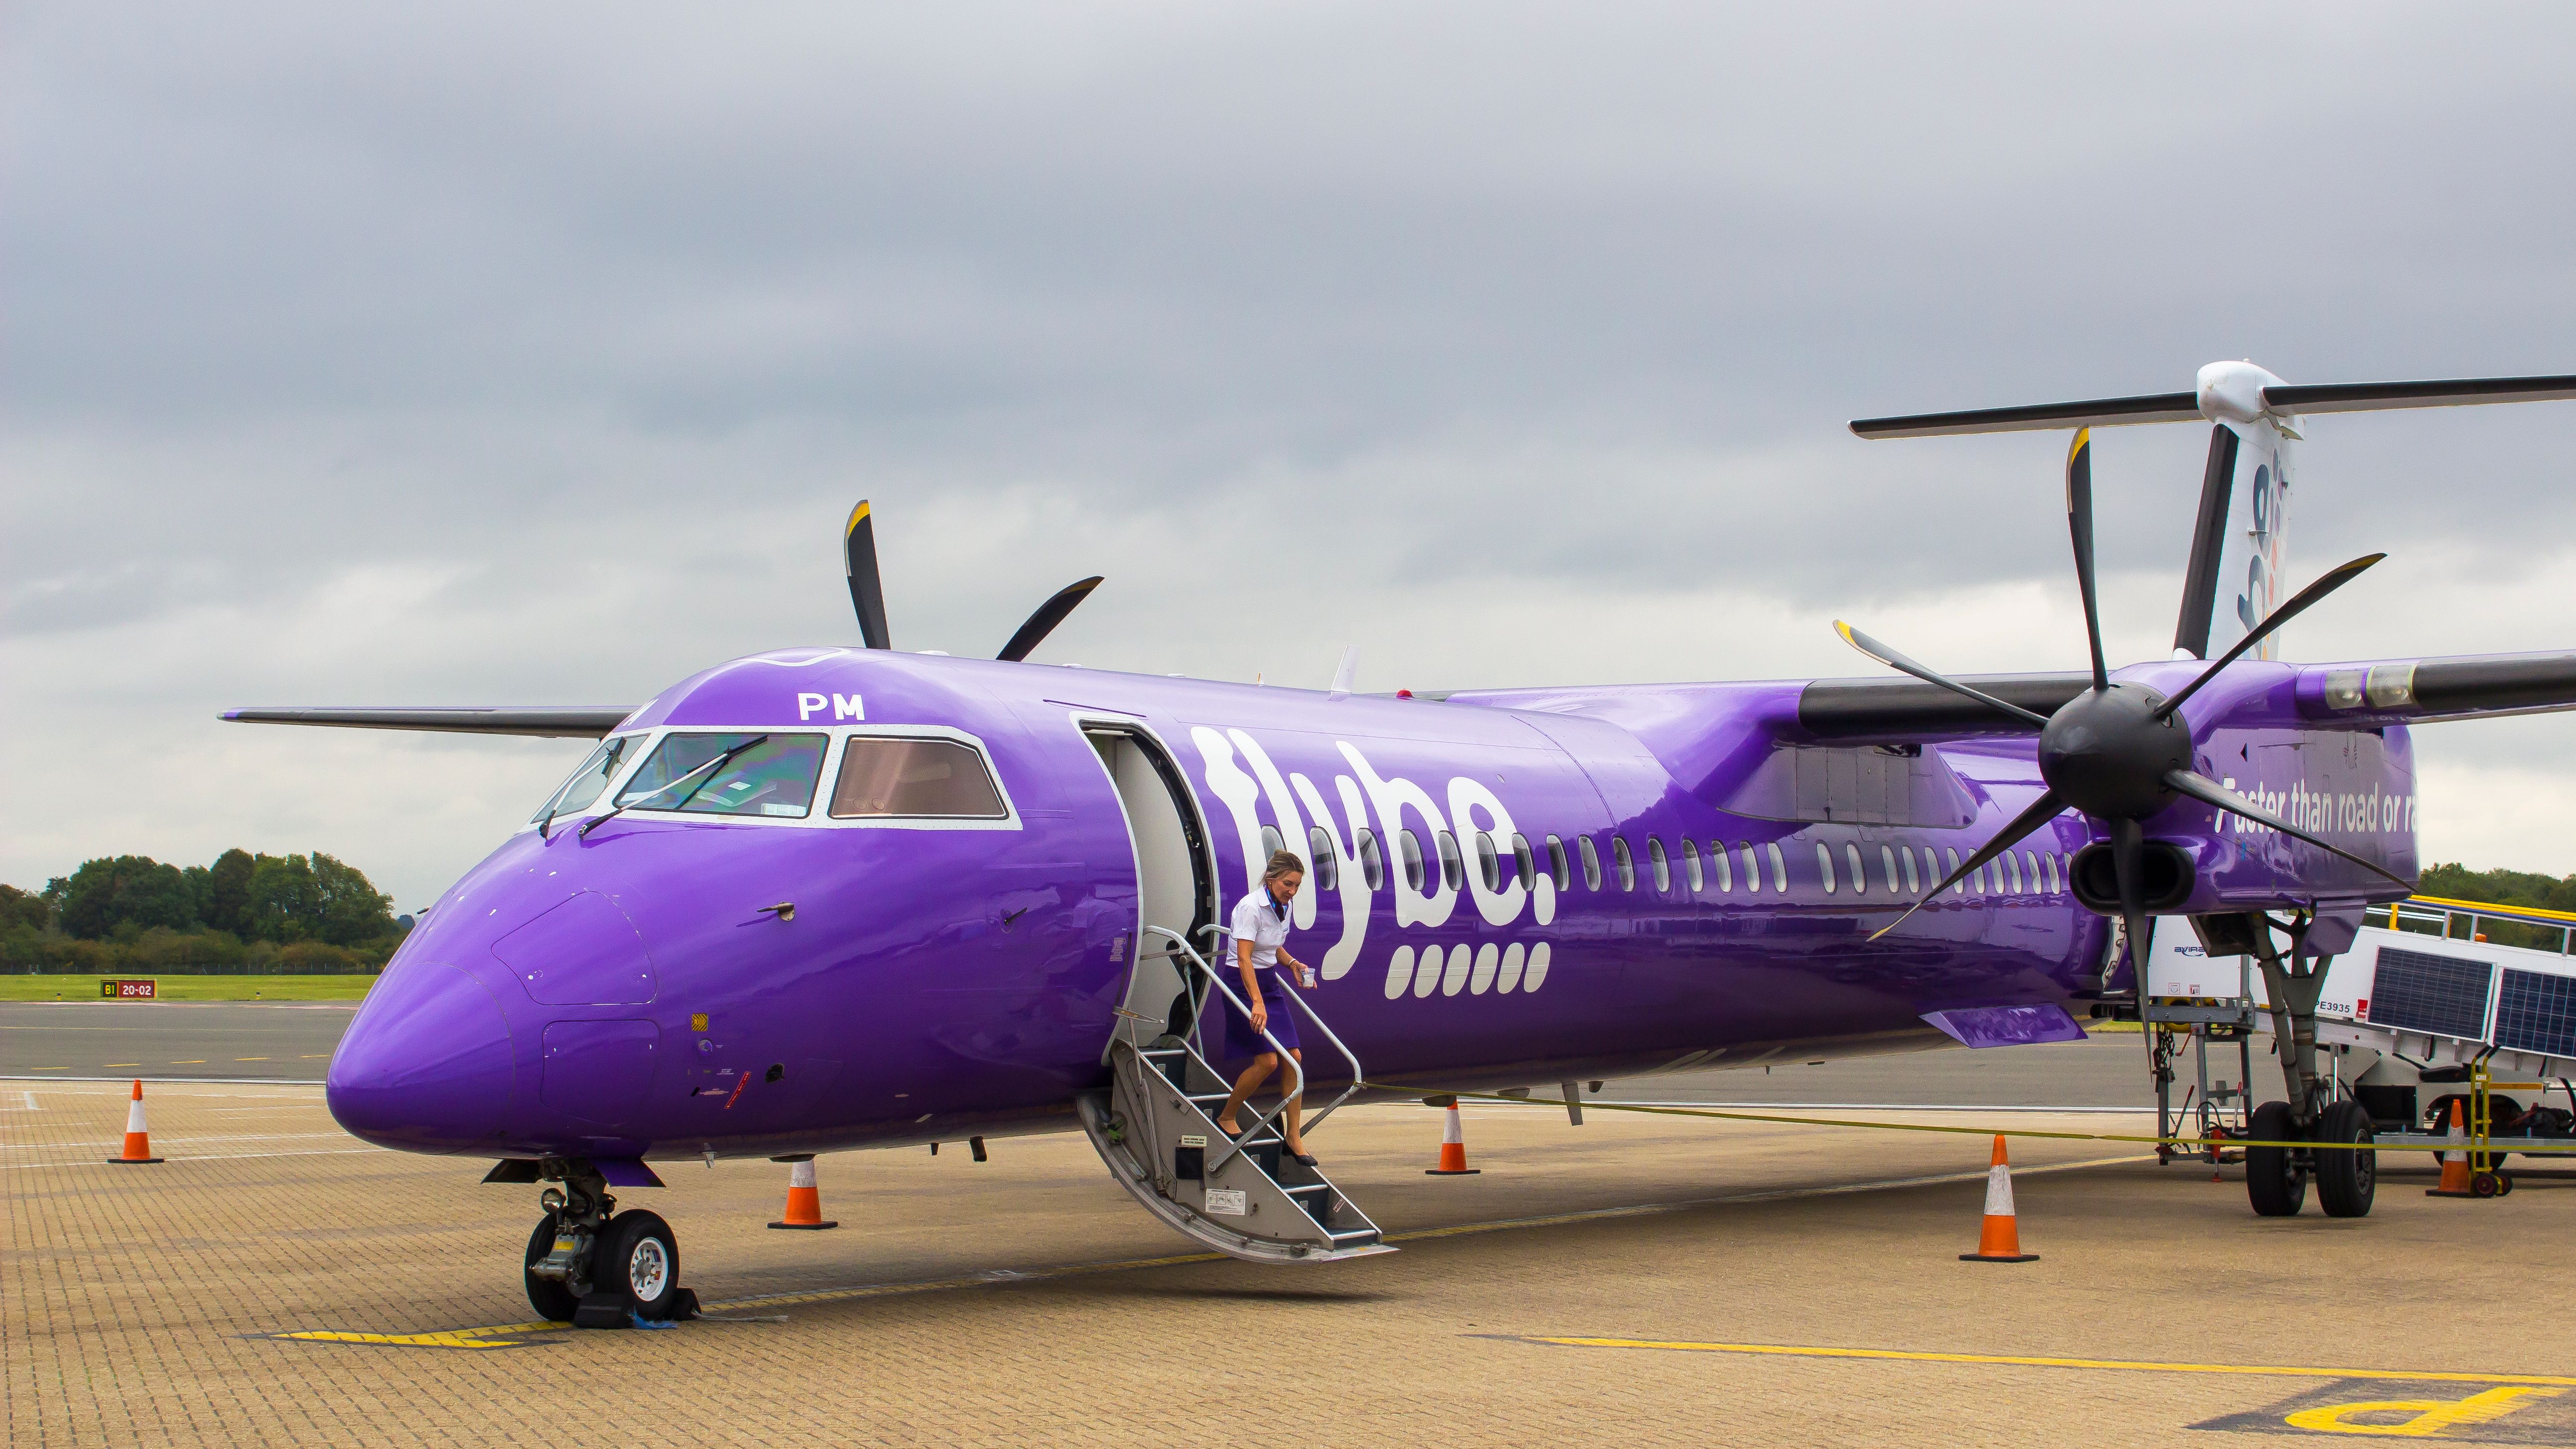 Flybe Dash 8 on the apron